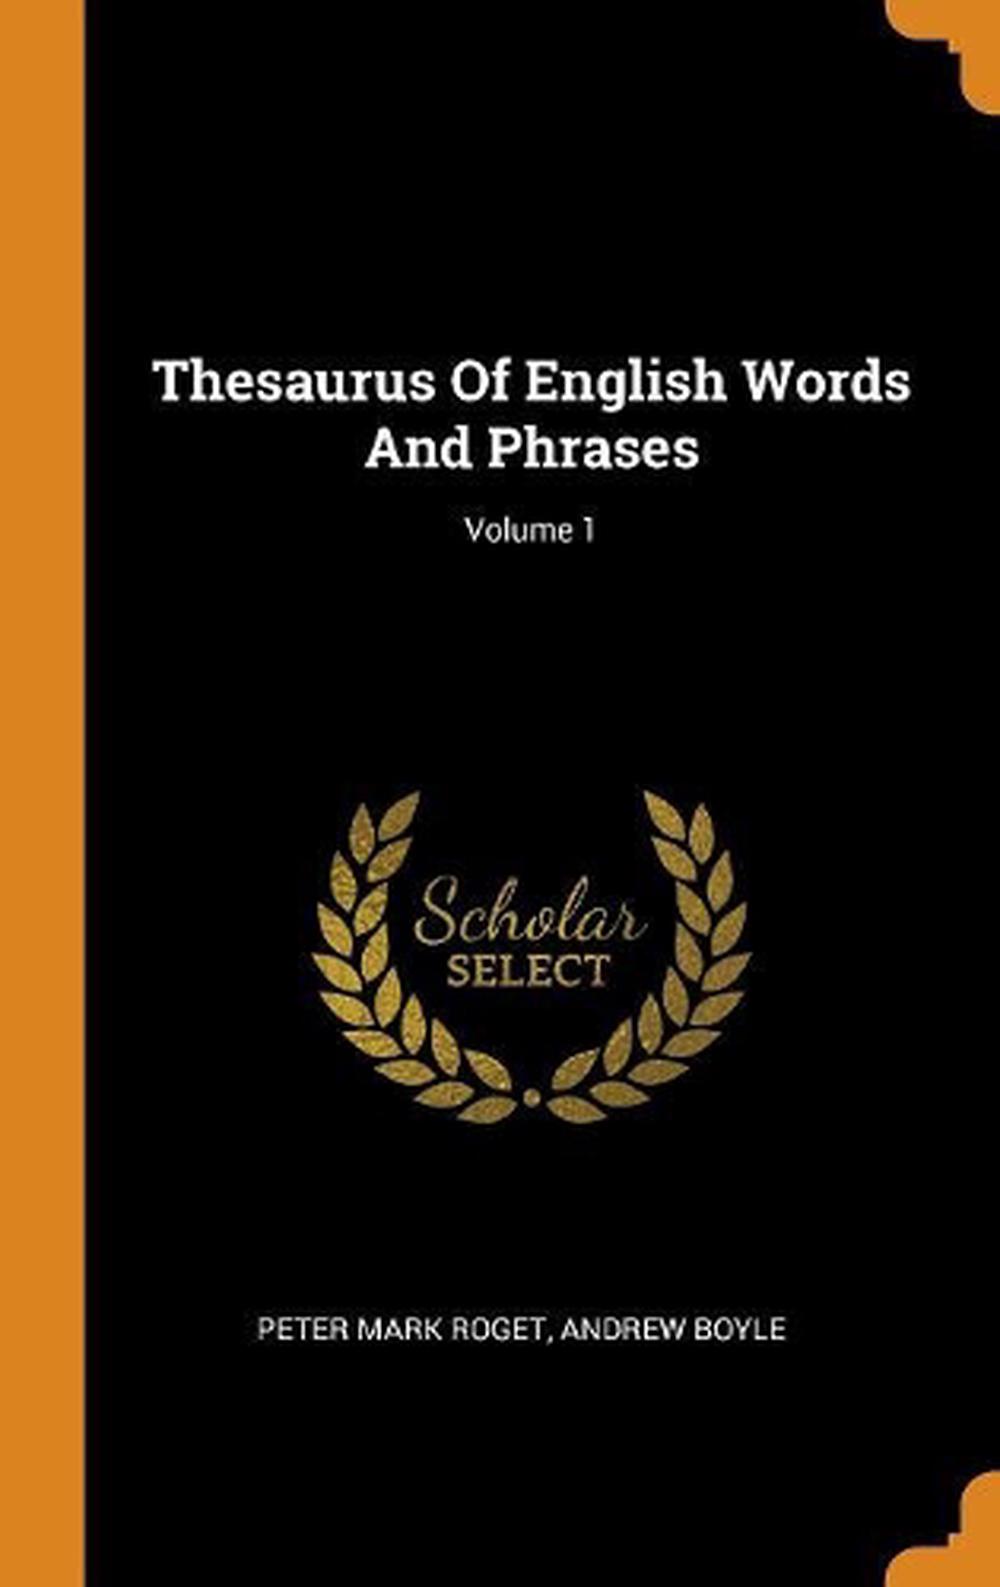 thesaurus of obscure words